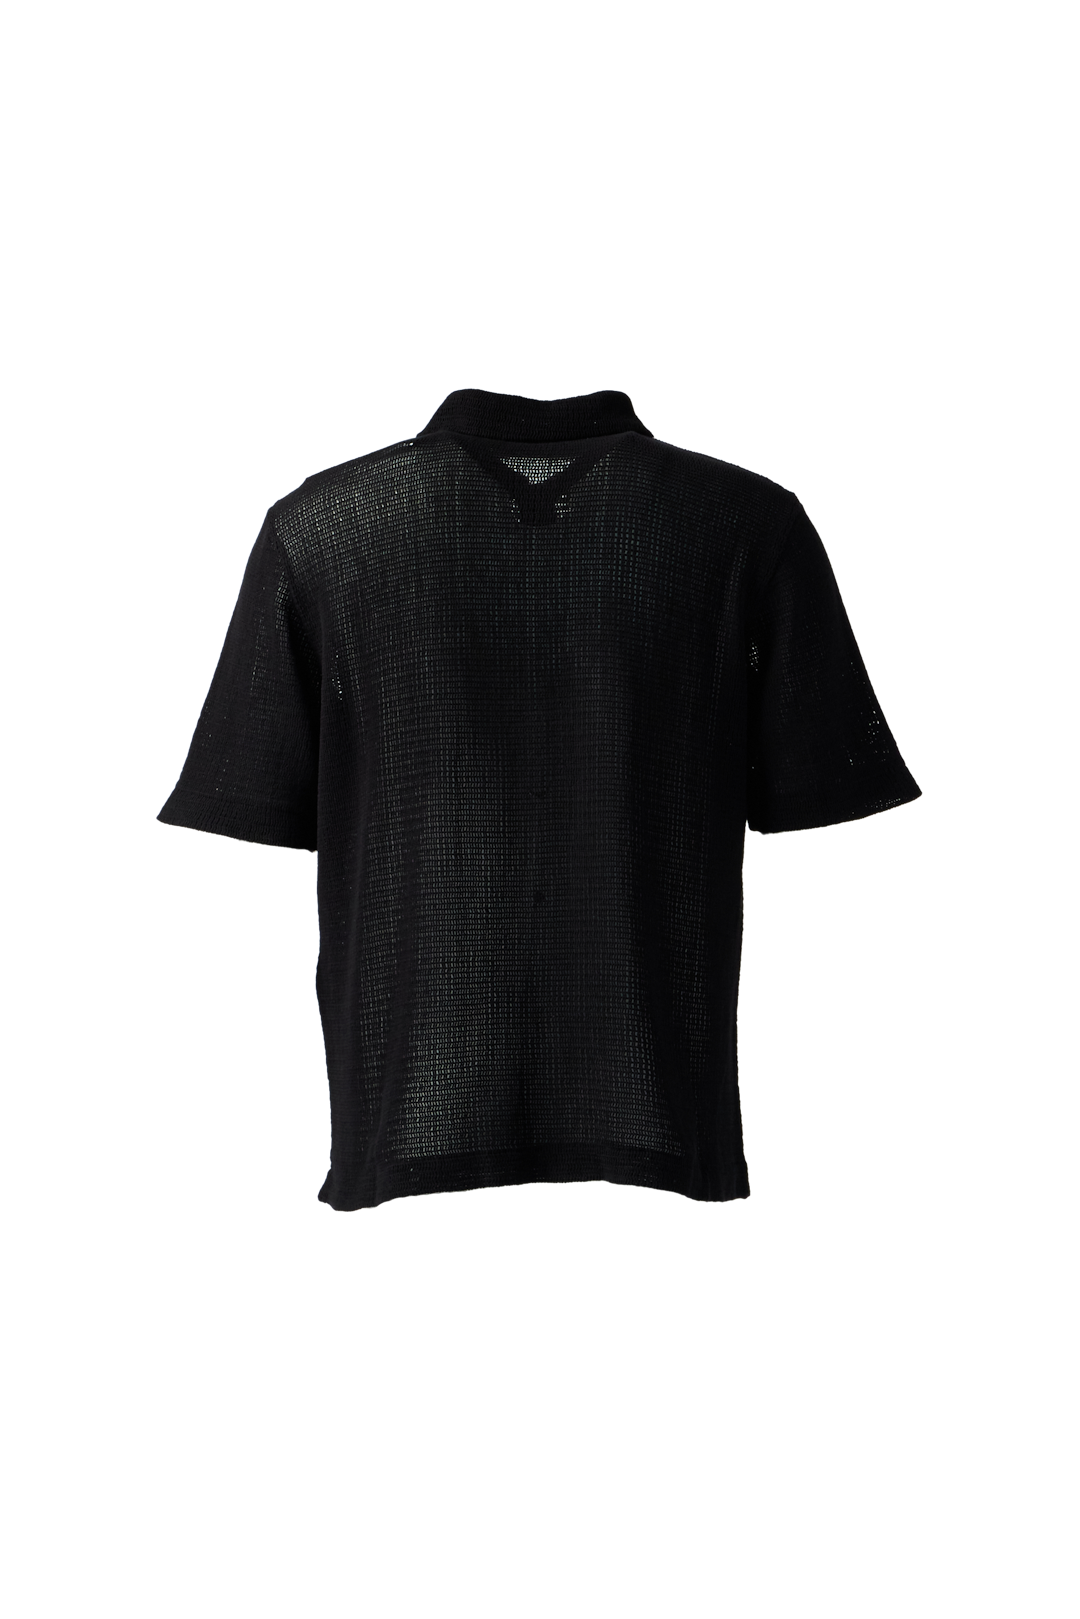 1017 ALYX 9SM - Button Up Logo Mesh S/S Shirt product image